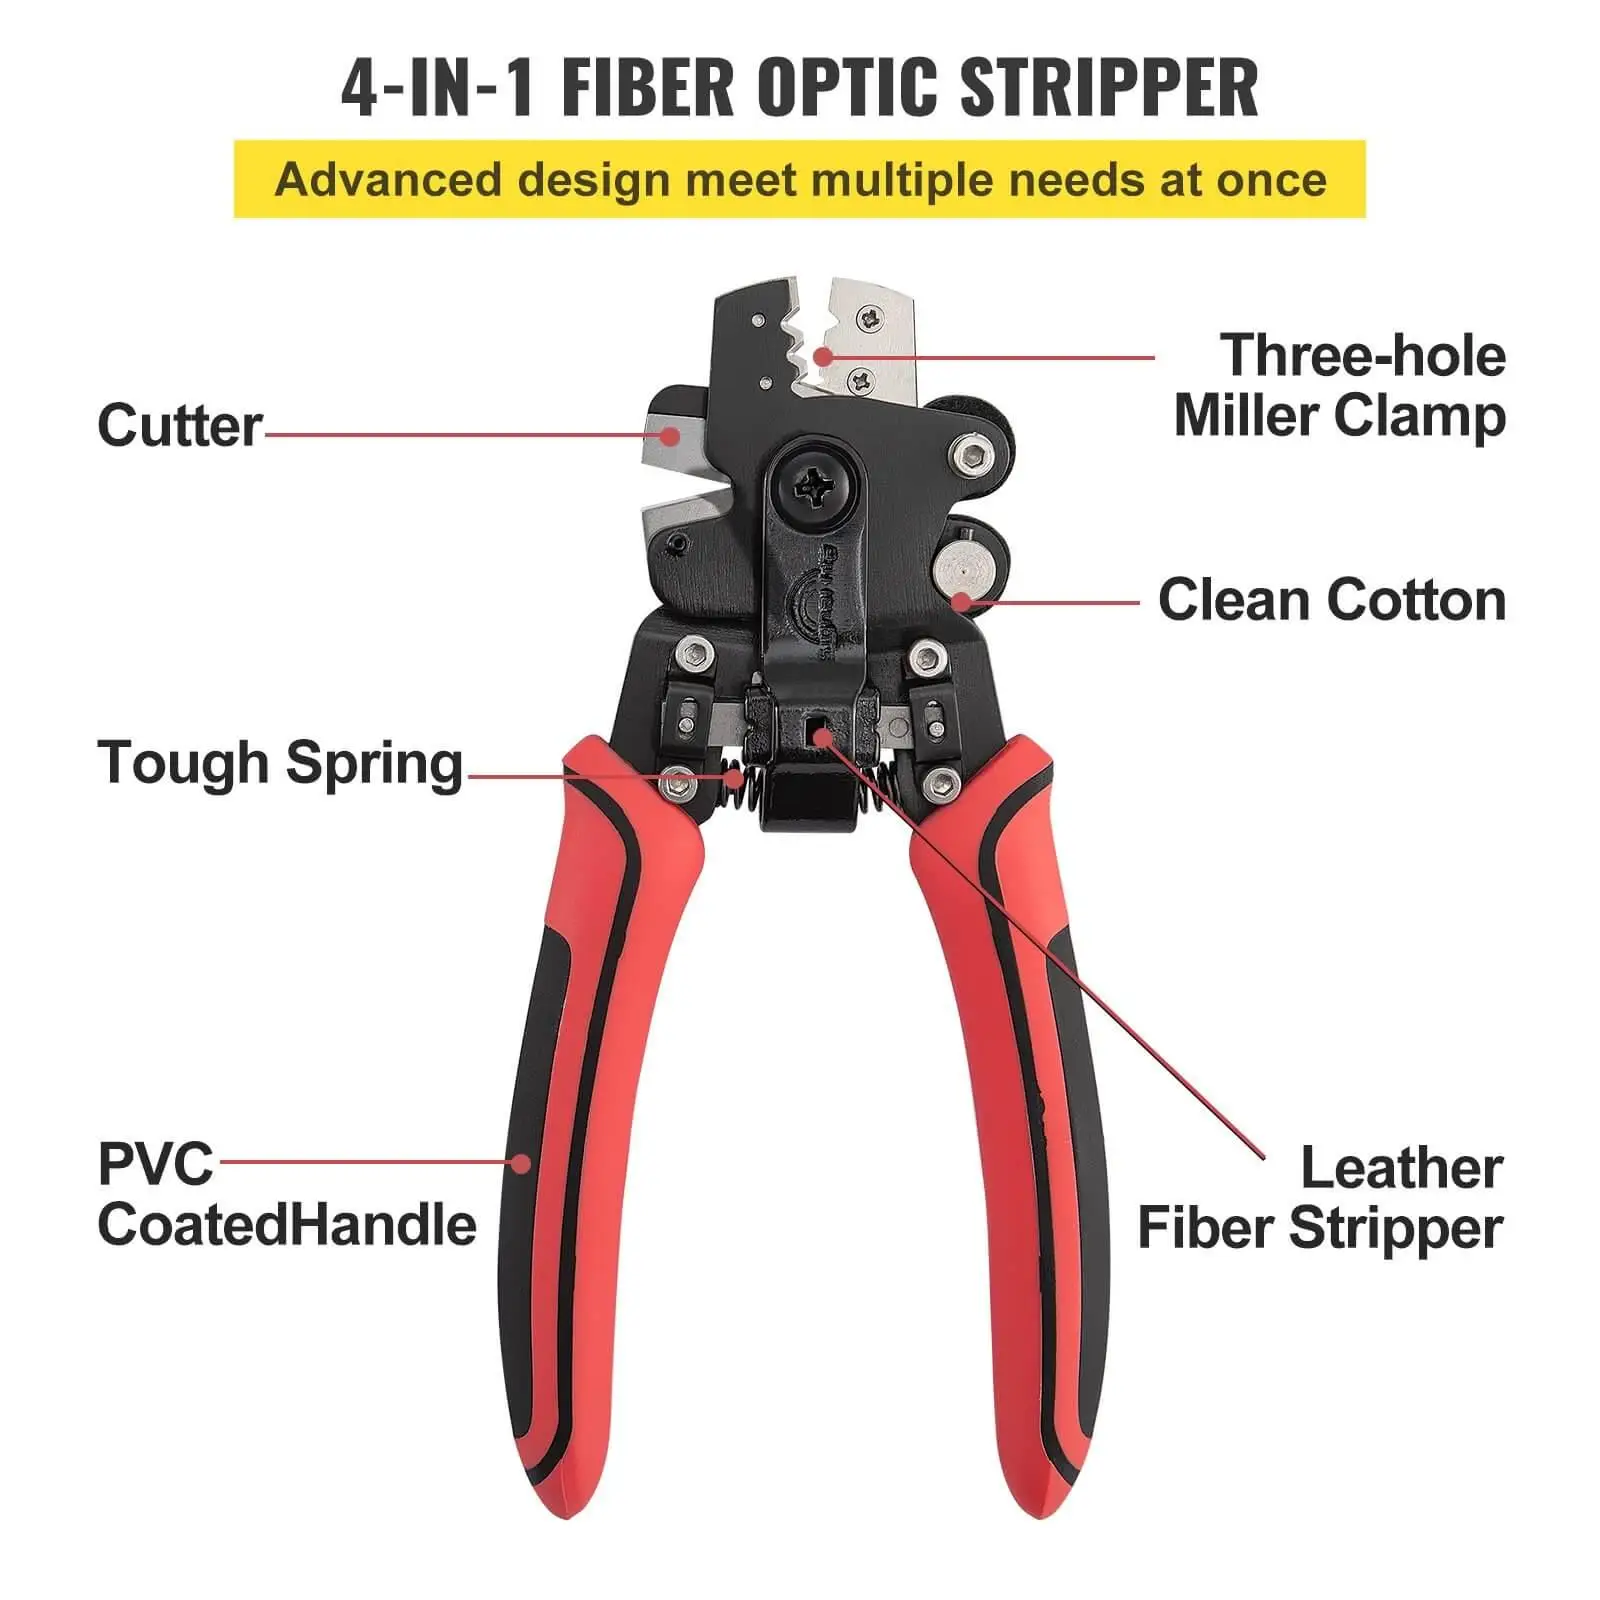 Duogalia 10-in-1 Wire Stripper Pliers, Cable cutters, 9